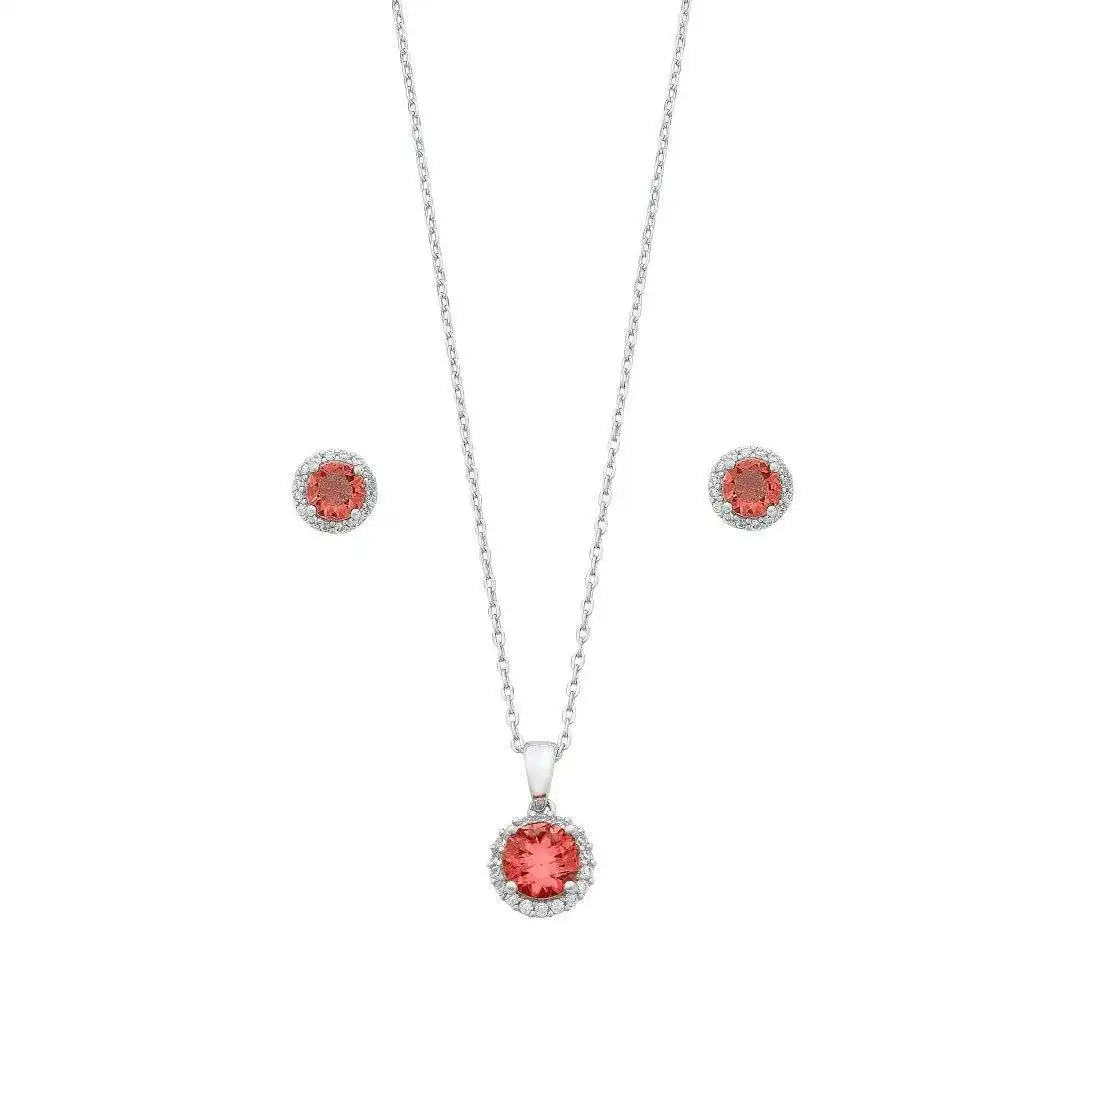 Red Cubic Zirconia Earring and Neklace Set in Sterling Silver